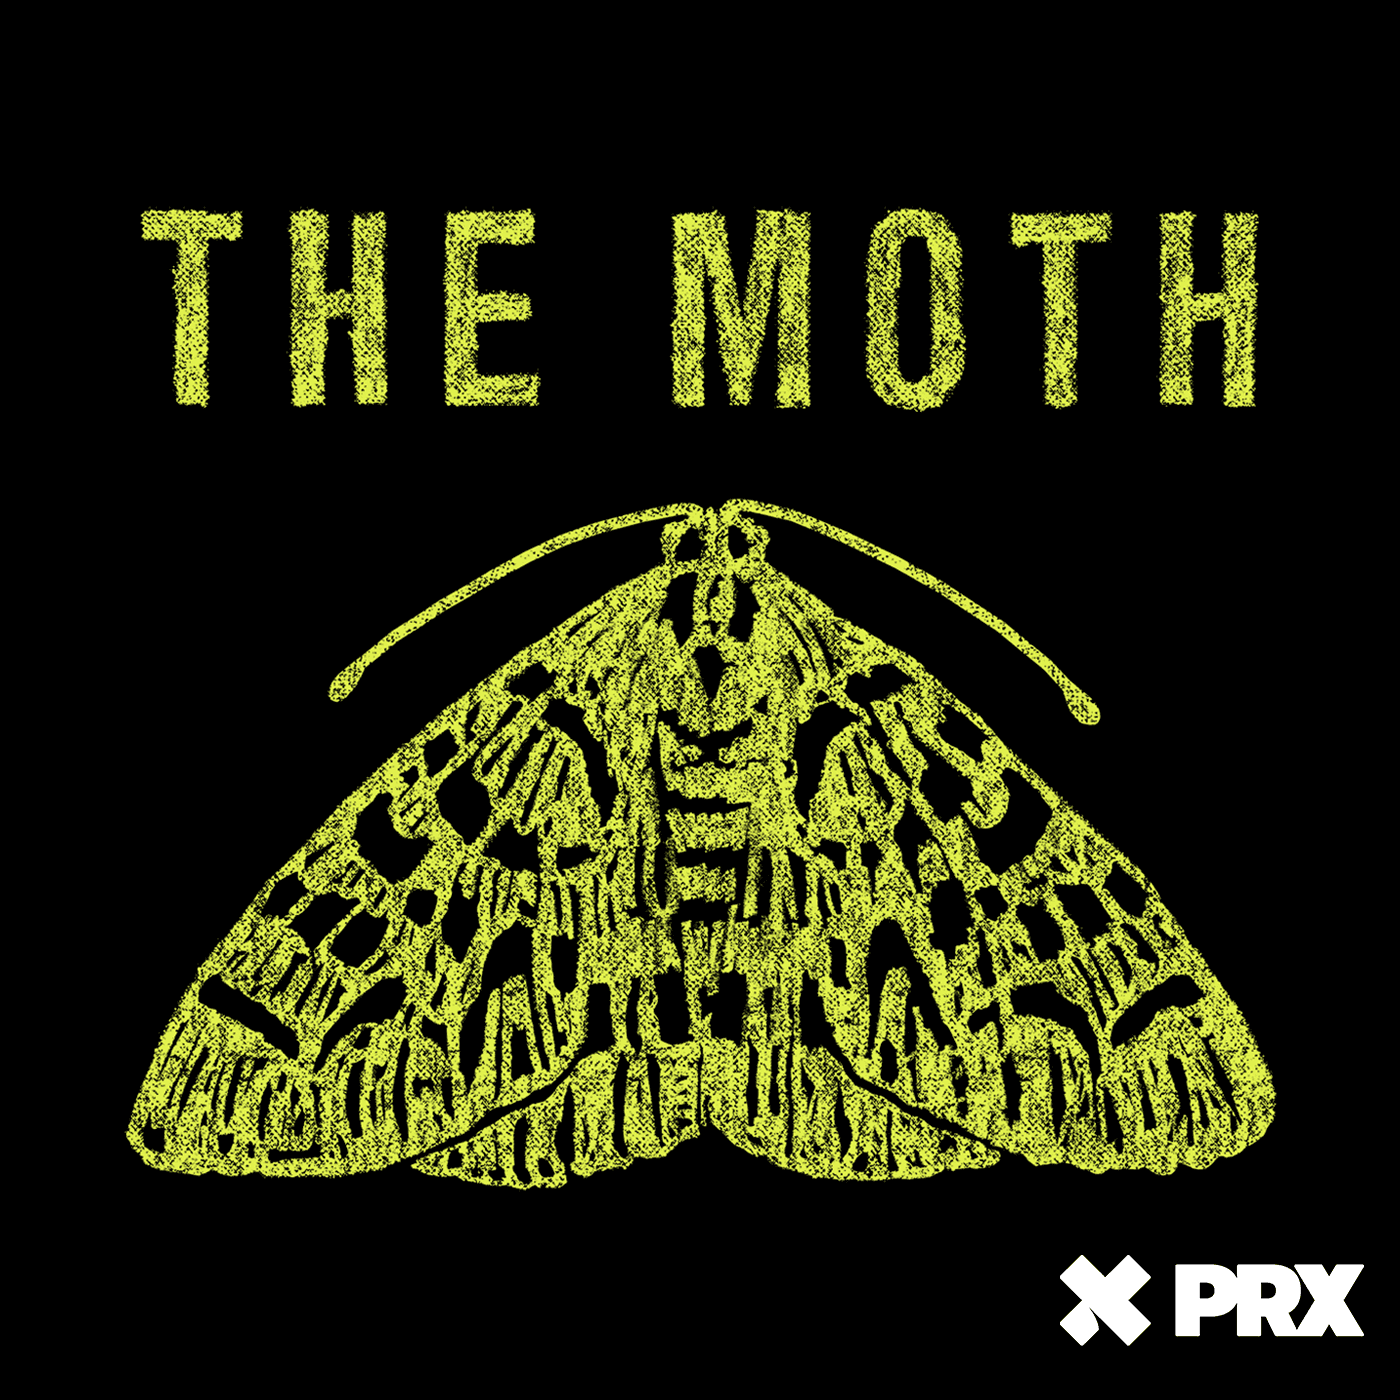 Thumbnail for "The Moth Radio Hour: Confidence Game".